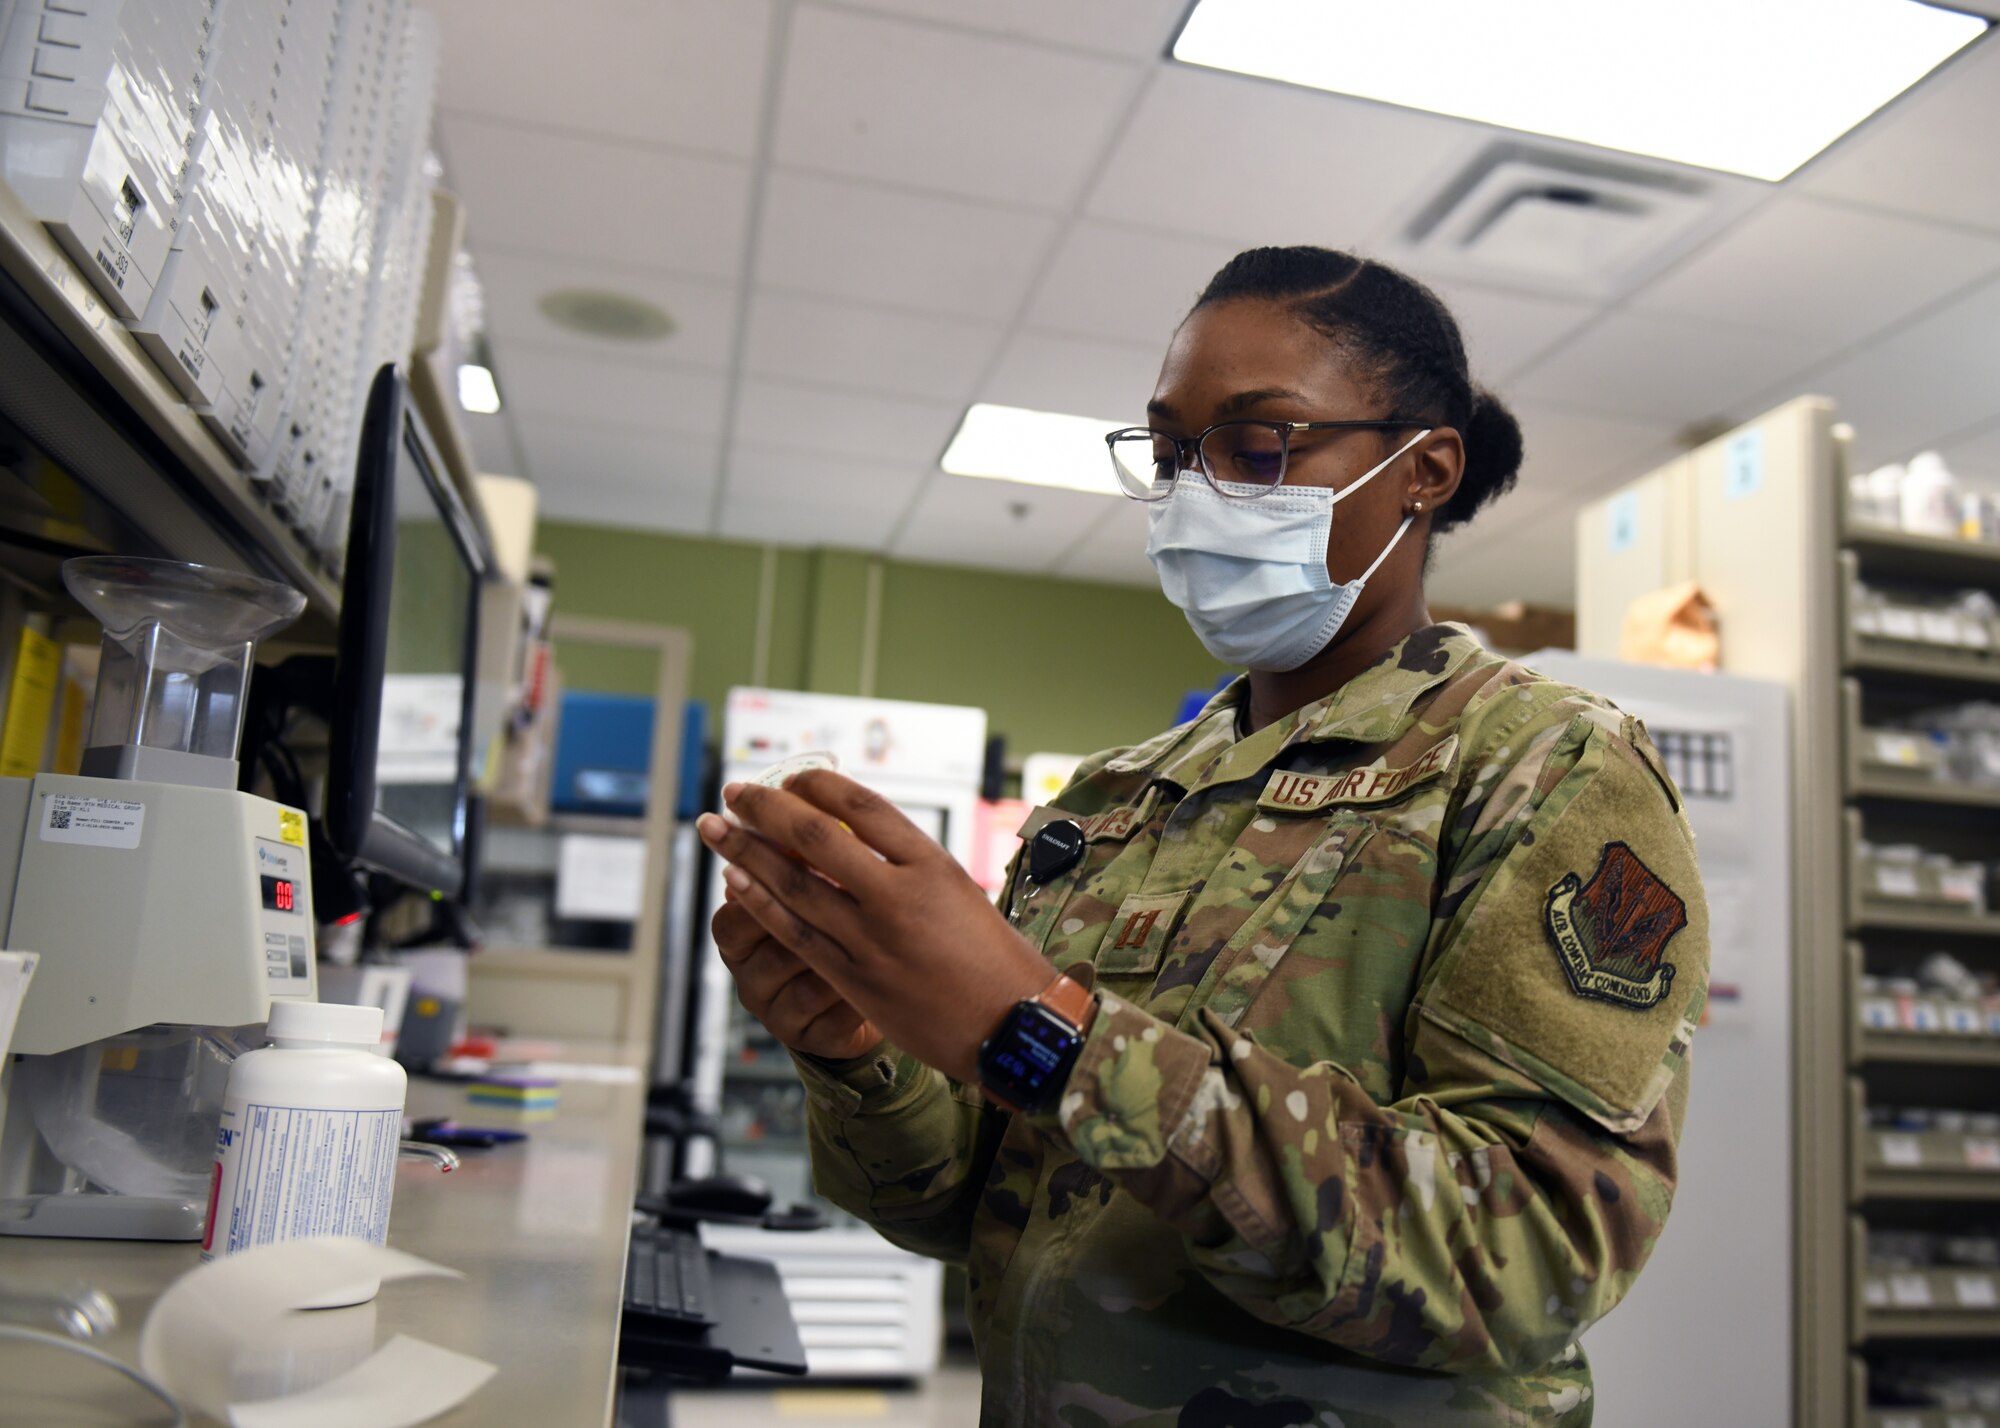 Capt. Brianna Holmes, 9th Healthcare Operations Squadron pharmacy element chief, labels a prescription pill vial, Oct. 22, 2020, at Beale Air Force Base, California. More than 10,000 prescriptions are filled by Airmen working at the pharmacy every month. (U.S. Air Force photo by Airman 1st Class Luis A. Ruiz-Vazquez)